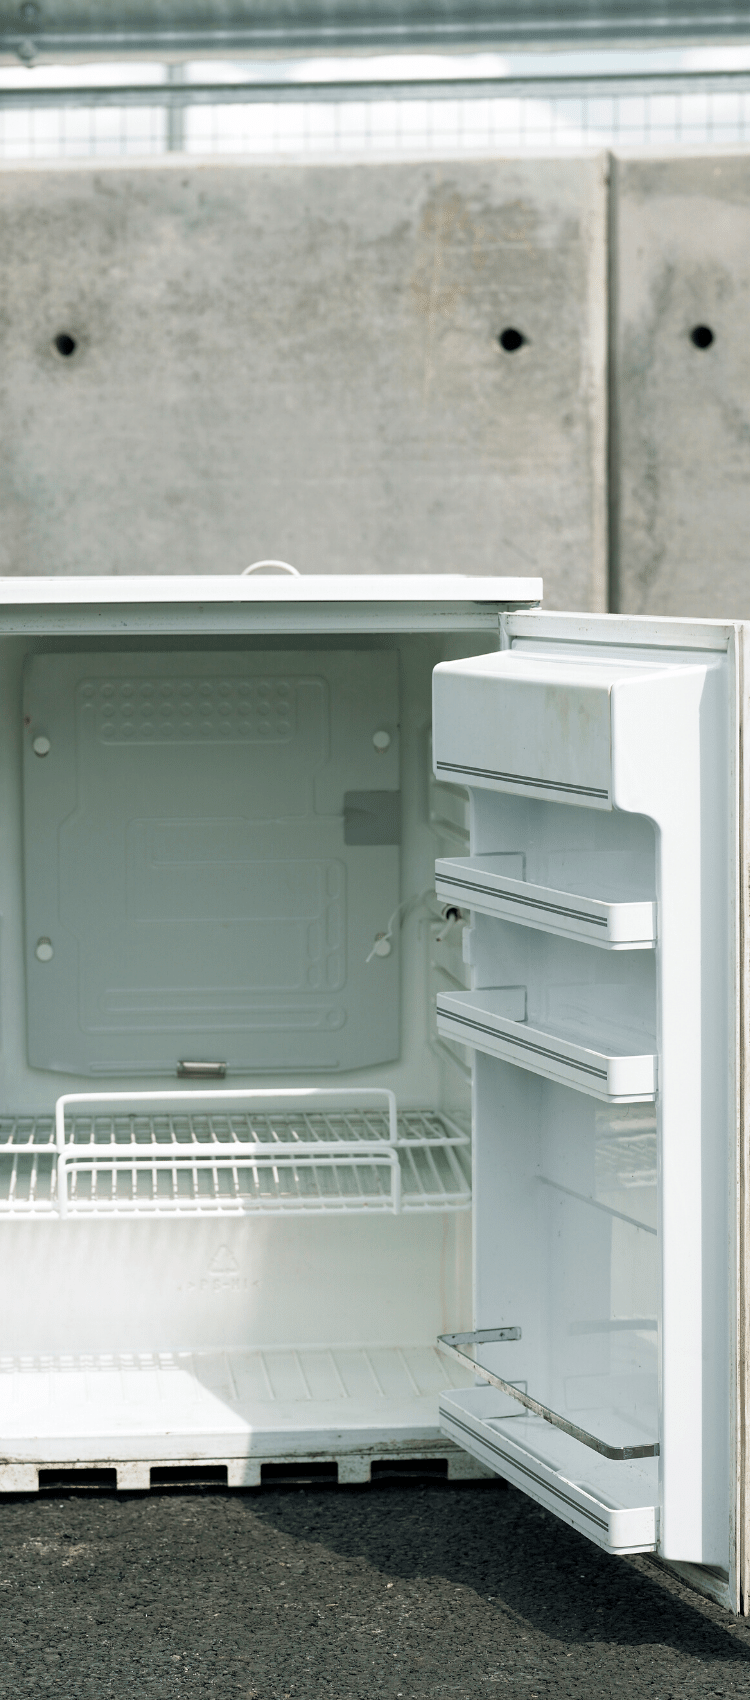 Open fridge to be removed